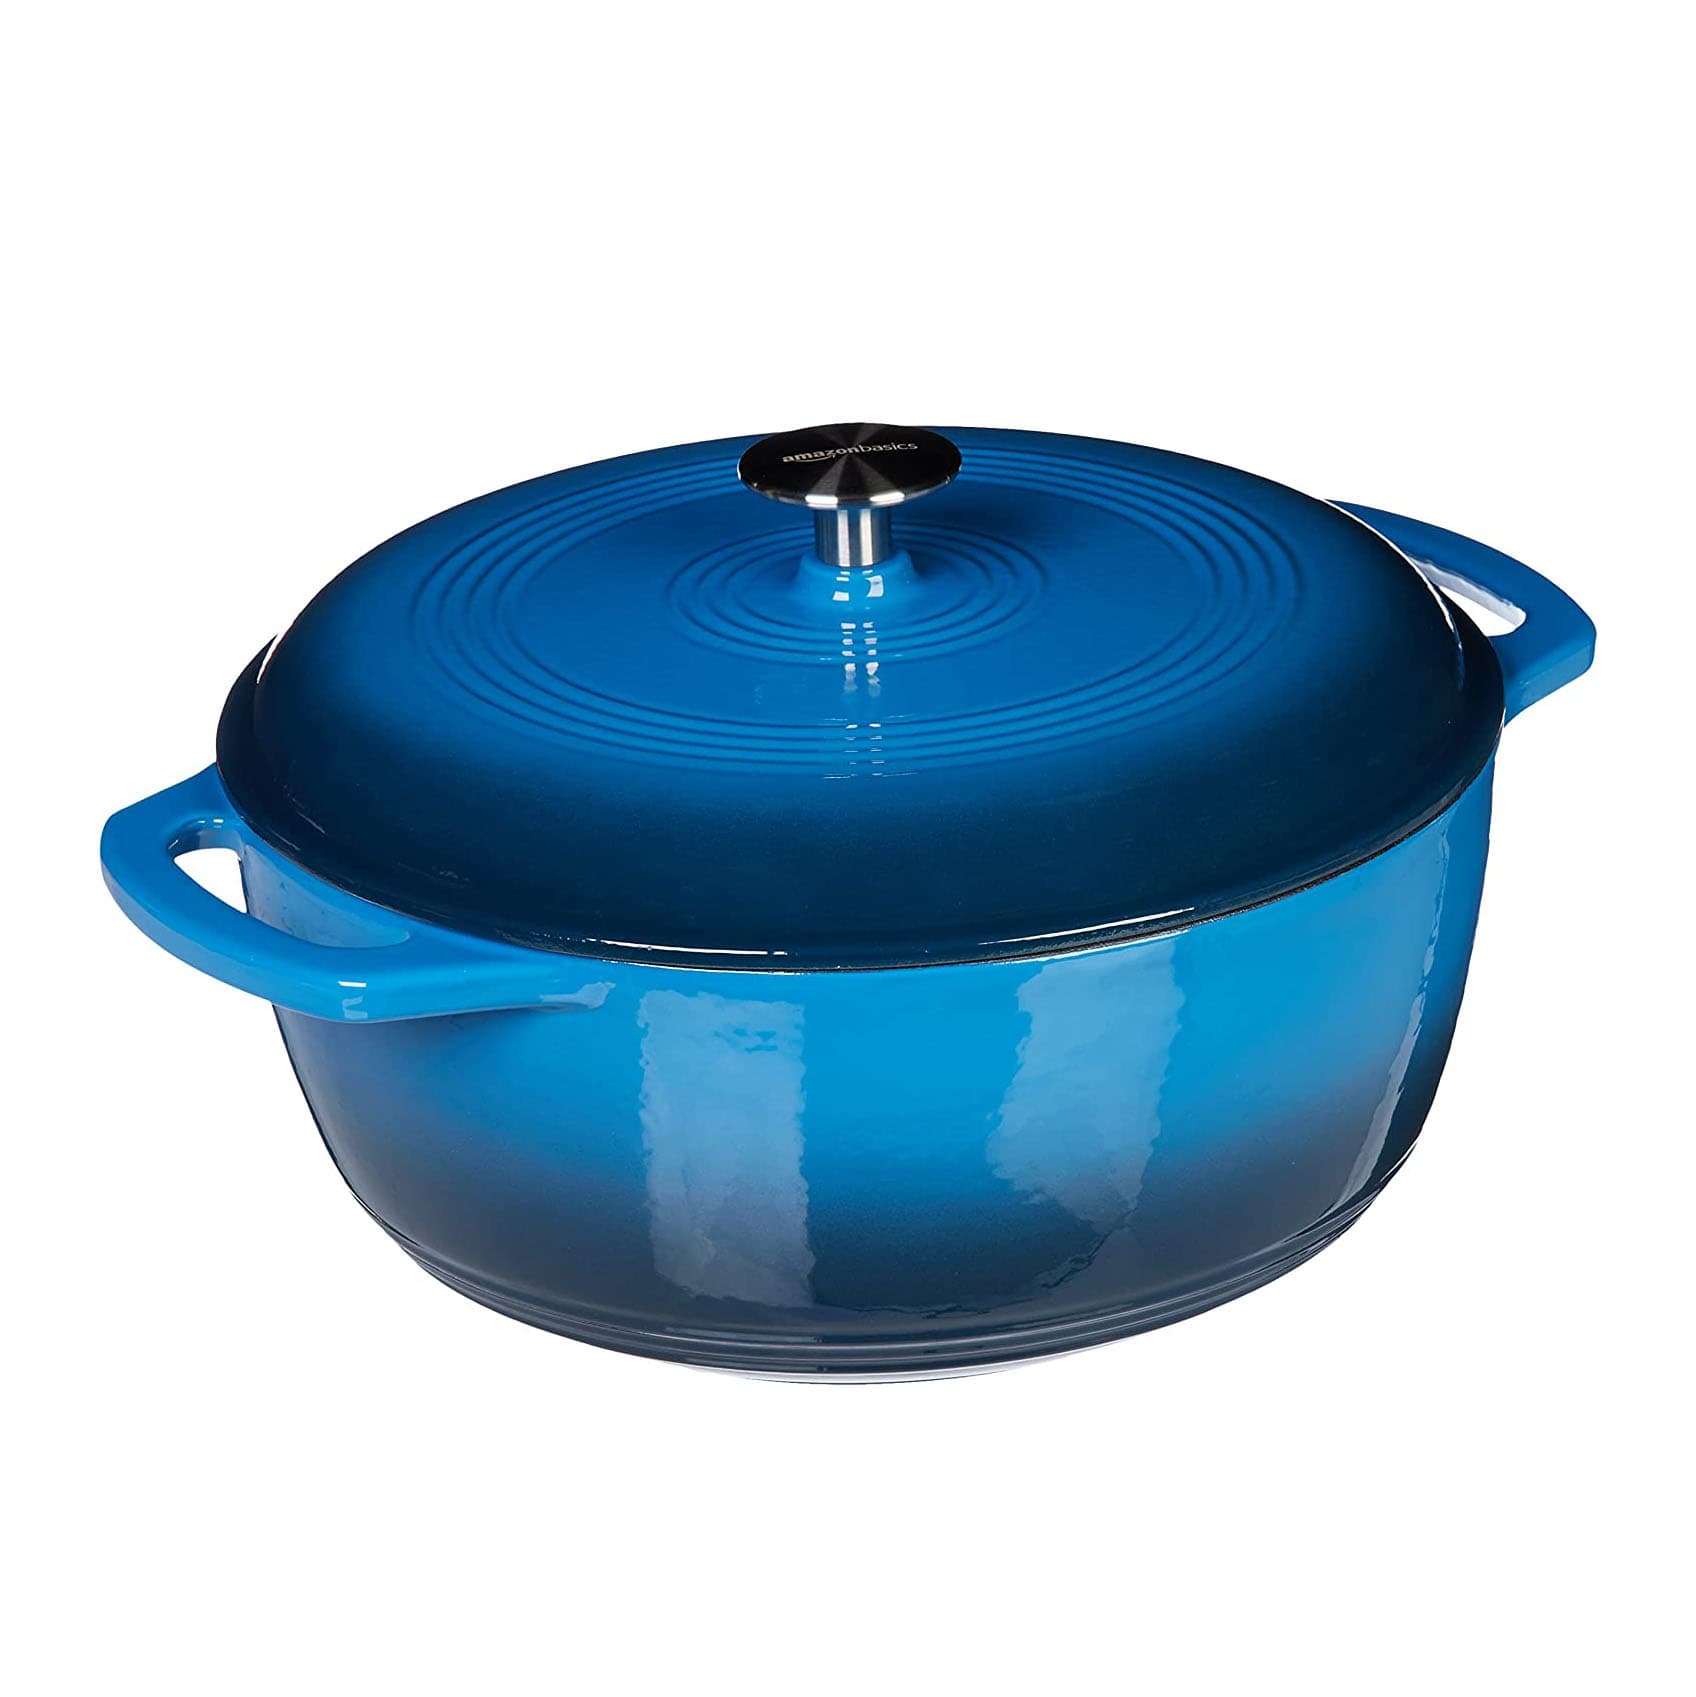 Basics Dutch Oven Review 2023 - It's on Sale For Prime Day!